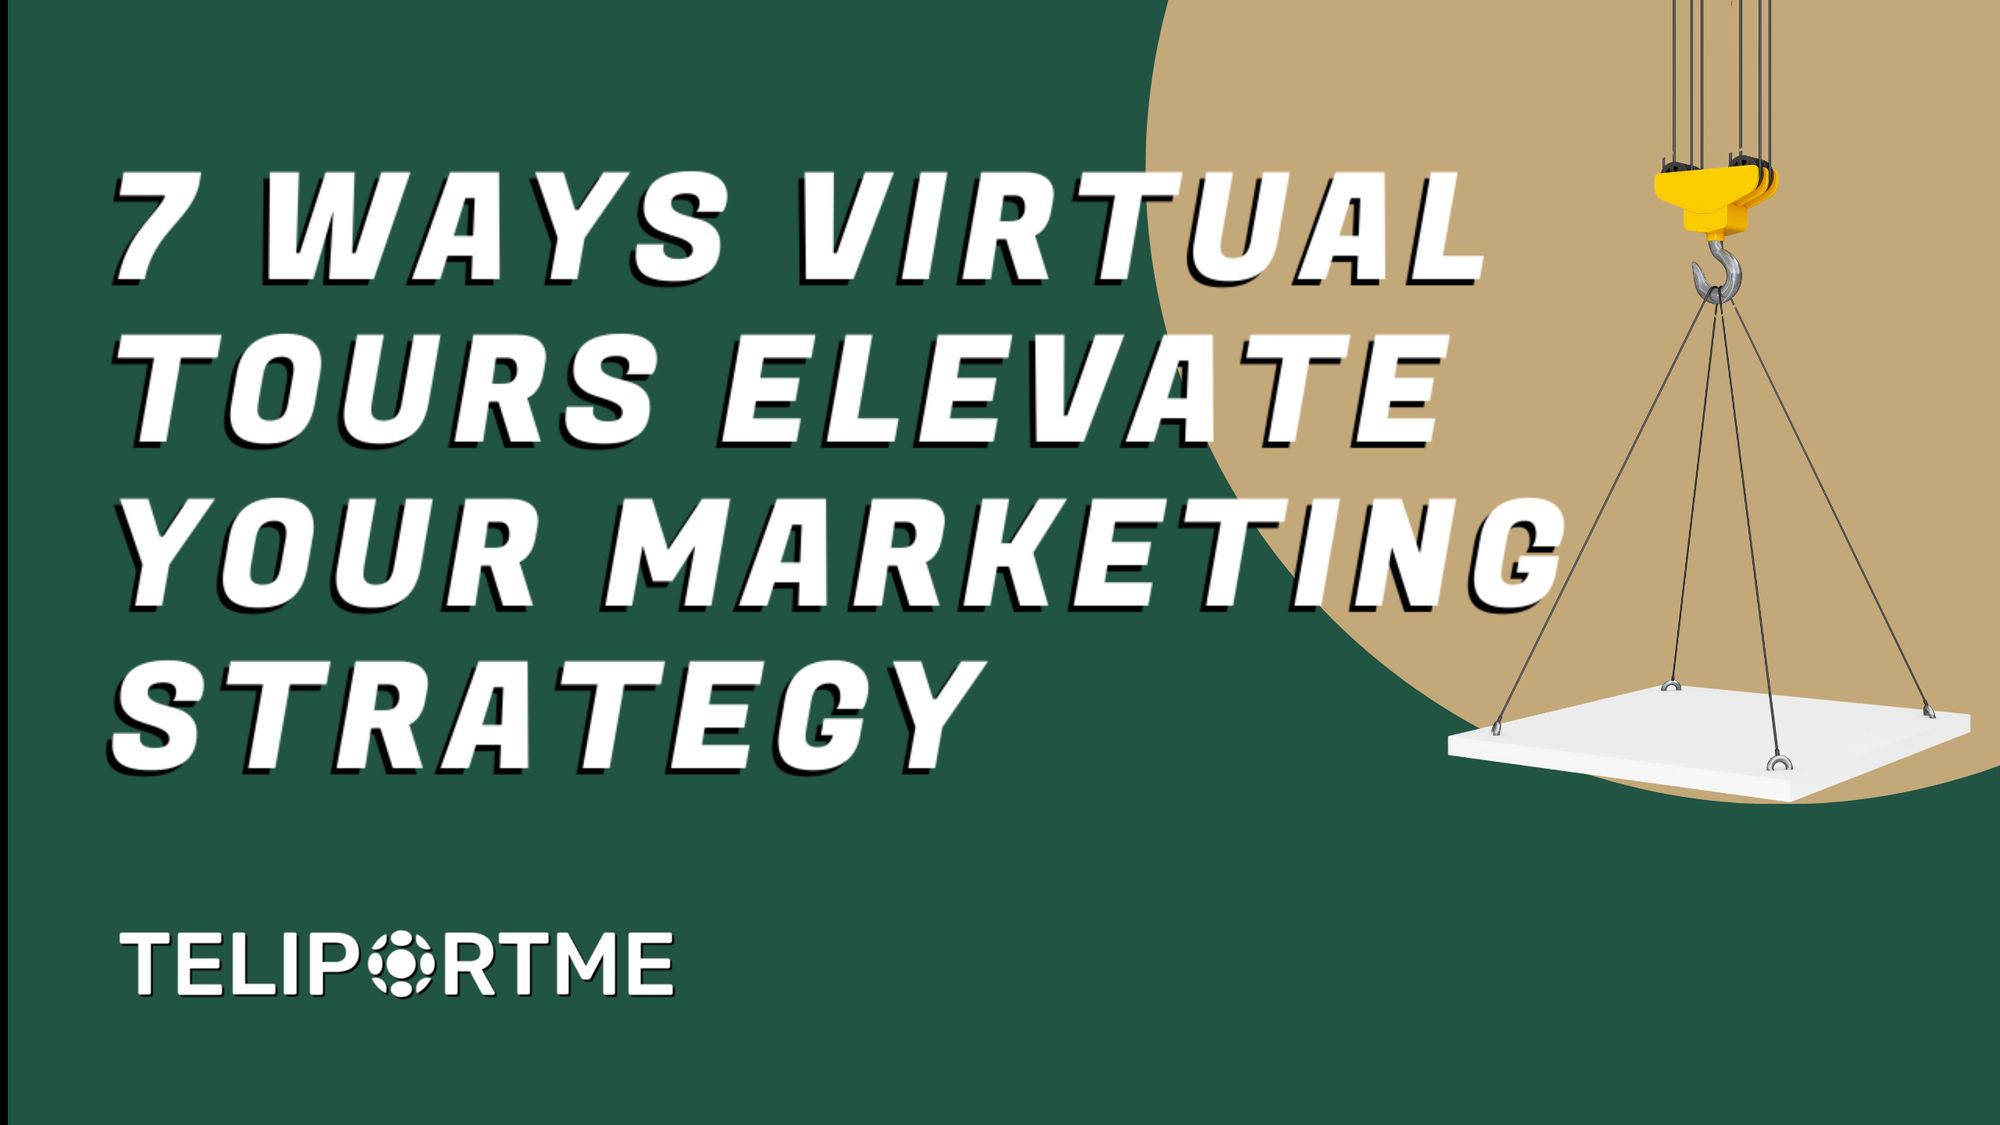 7 Ways Virtual Tours Elevate Your Marketing Strategy